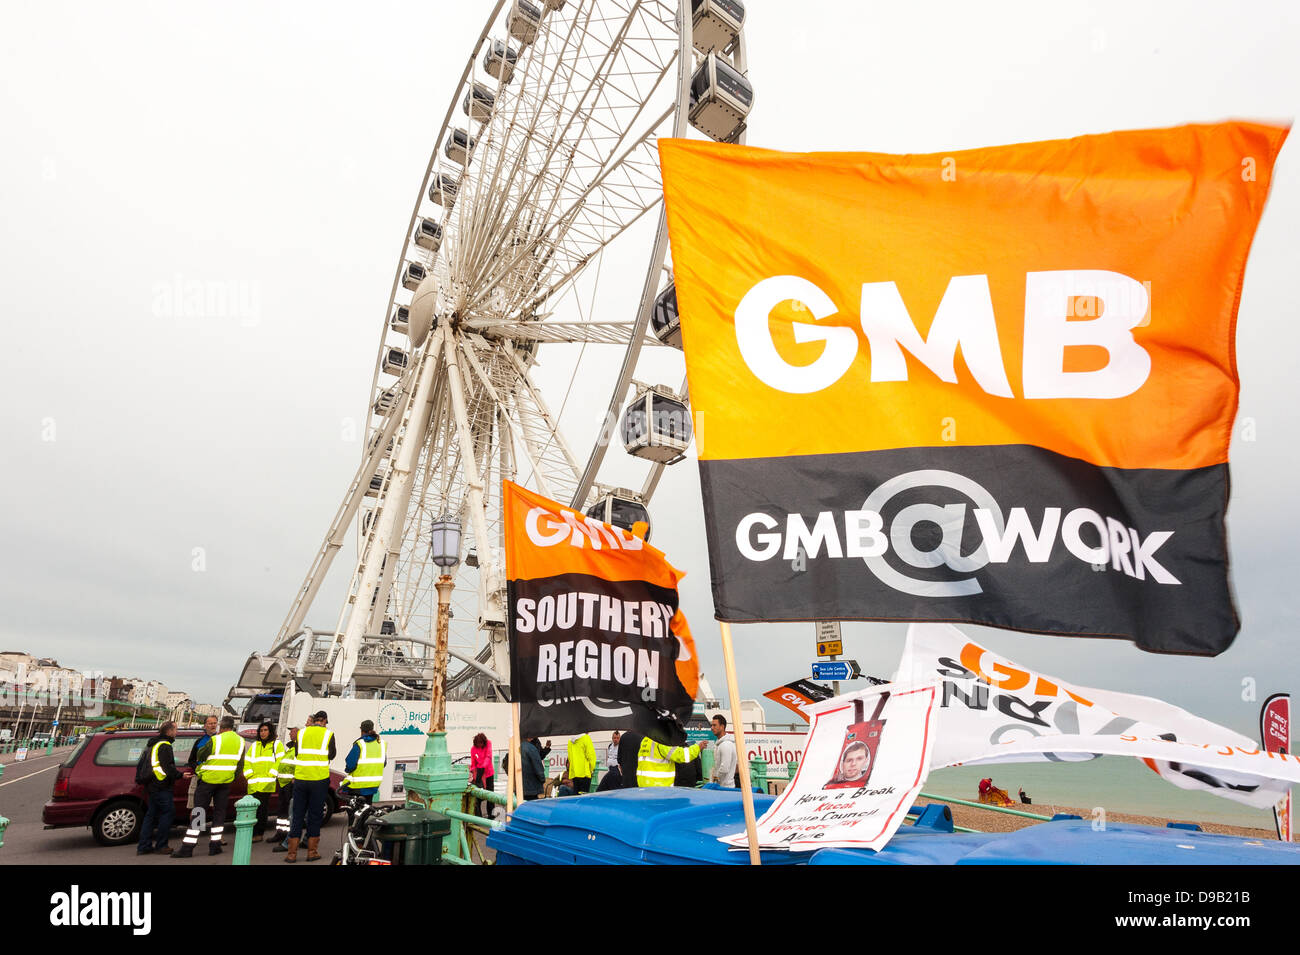 Brighton, UK. 17th June, 2013. Council workers protest against paycuts in Brighton by the Brighton Wheel. Refuse collecters and street cleaners are on strike in Brighton following attempts to cut their pay causing the city's streets to pile up with uncollected rubbish.  photo Credit: Julia Claxton/Alamy Live News Stock Photo